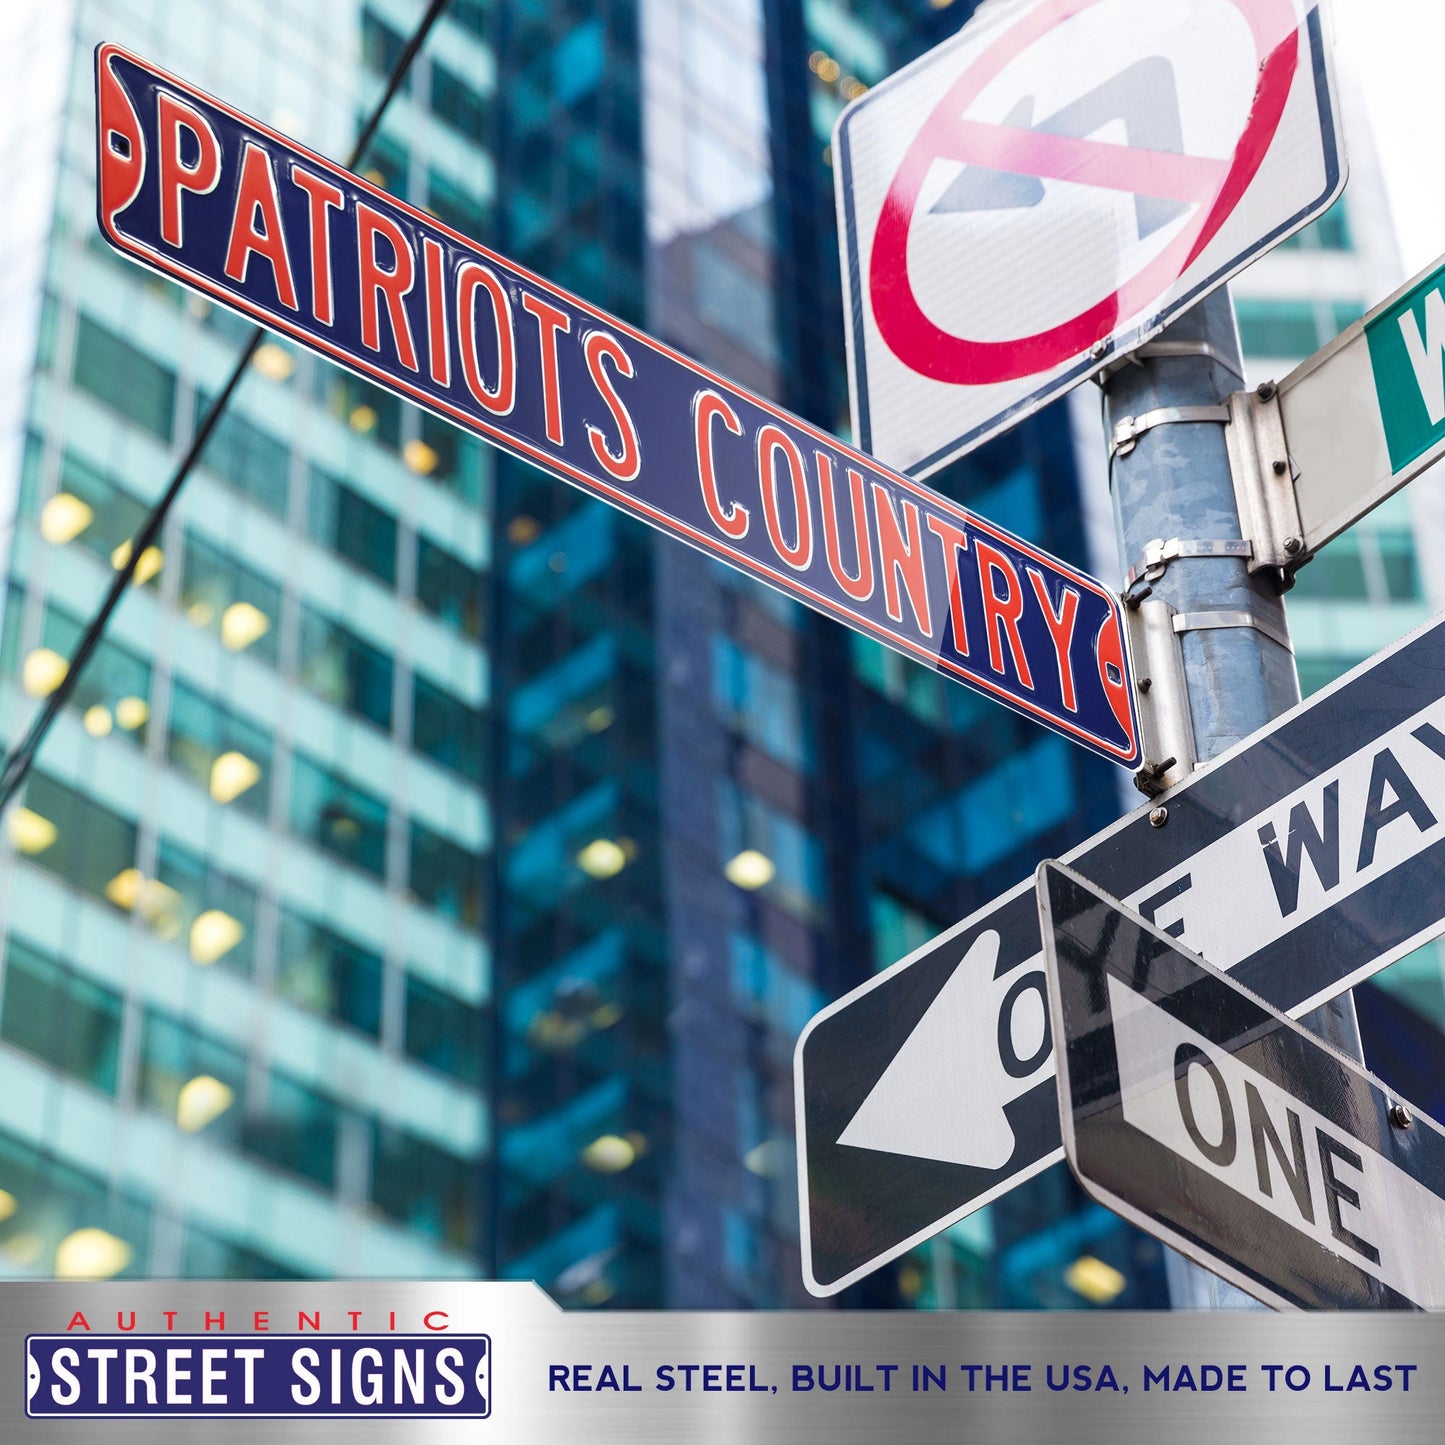 New England Patriots - PATRIOTS COUNTRY - Embossed Steel Street Sign